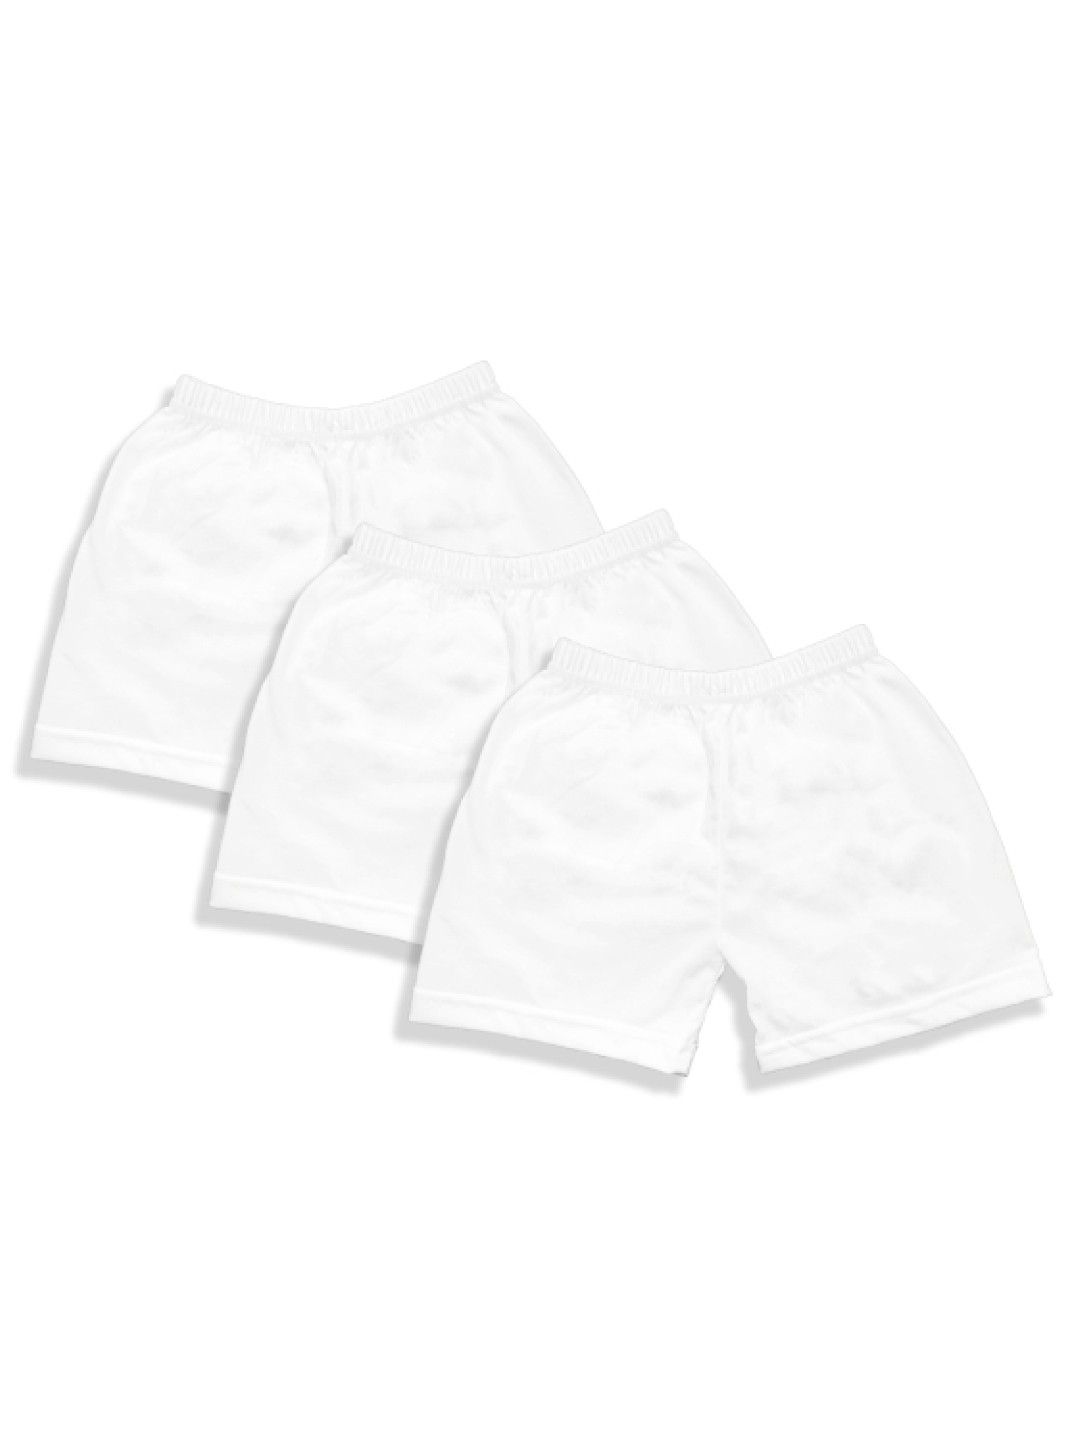 Cottonkind 3-Piece Shorts for Kids